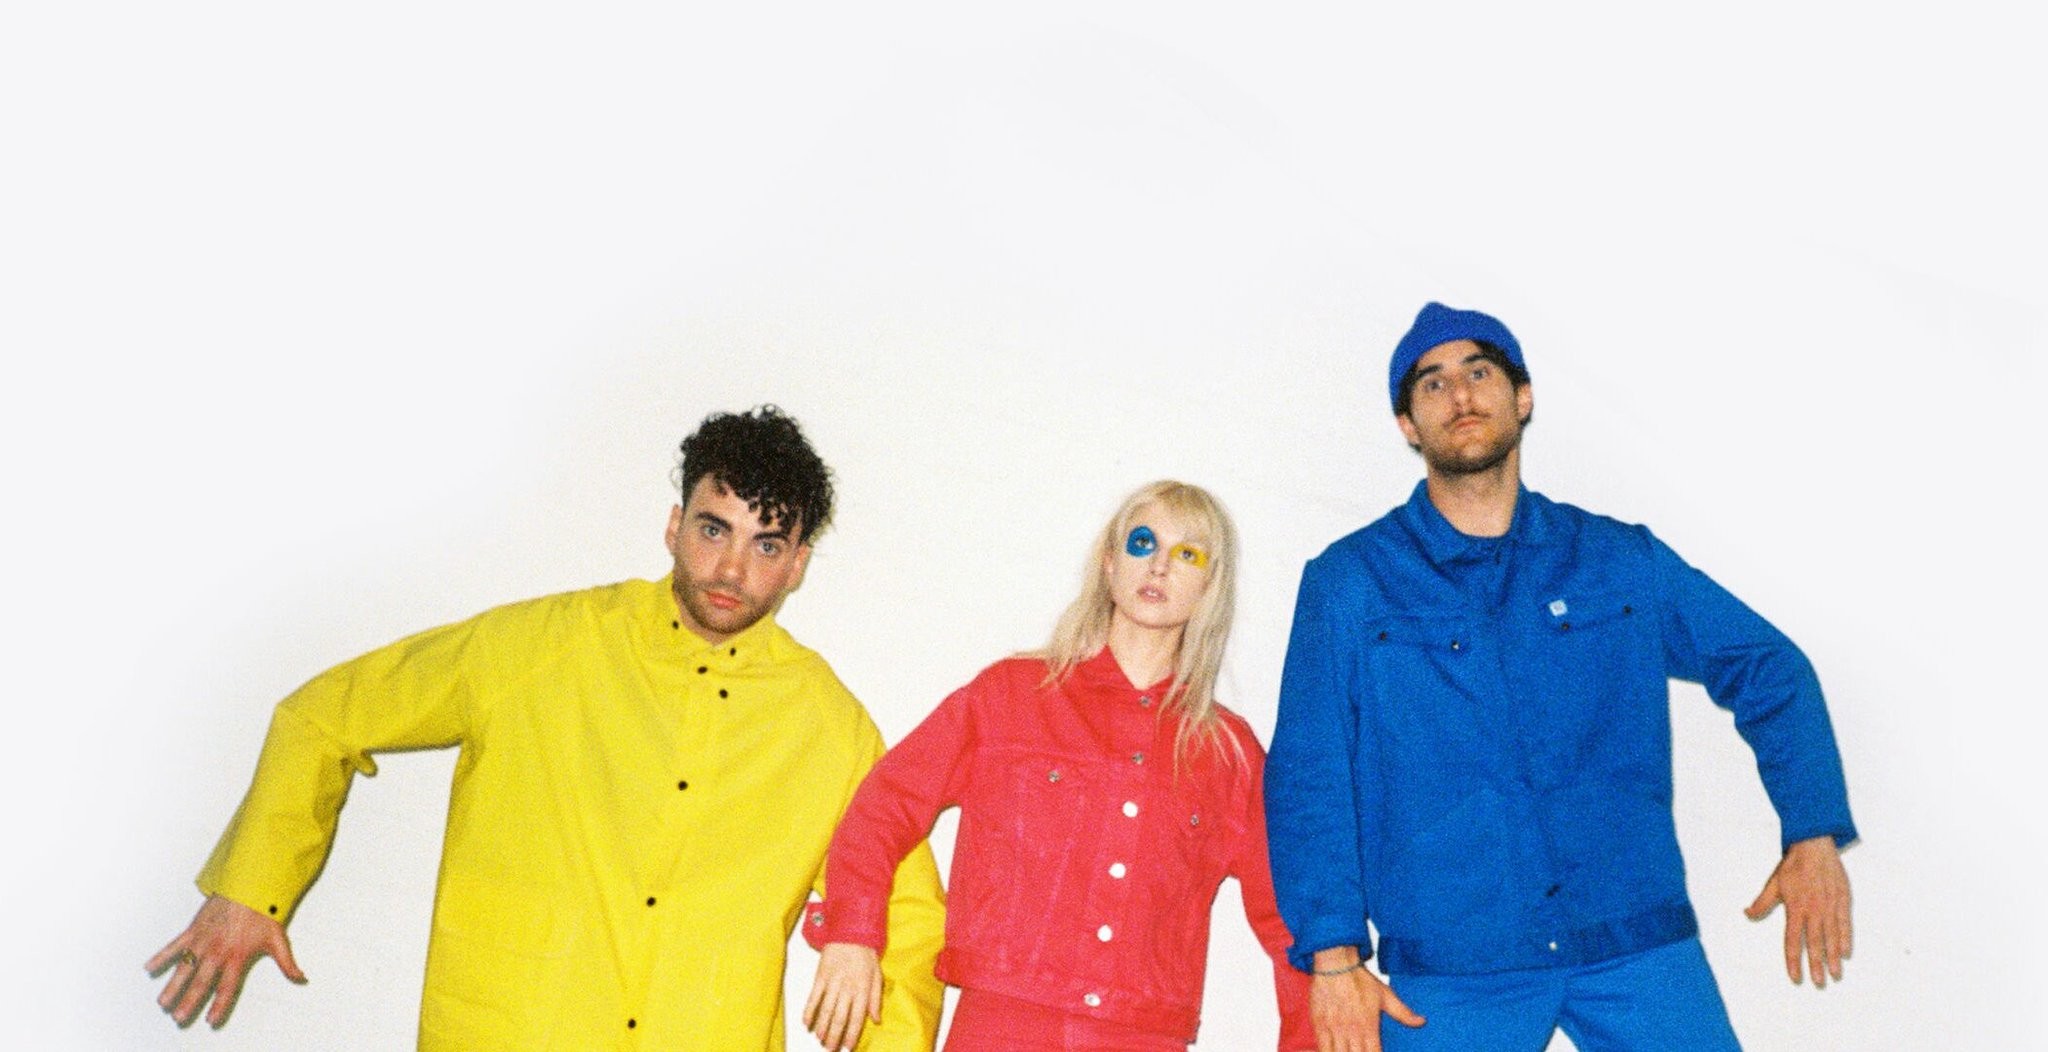 Paramore's Autobiographical Album Makes Music Out of Growing Pains